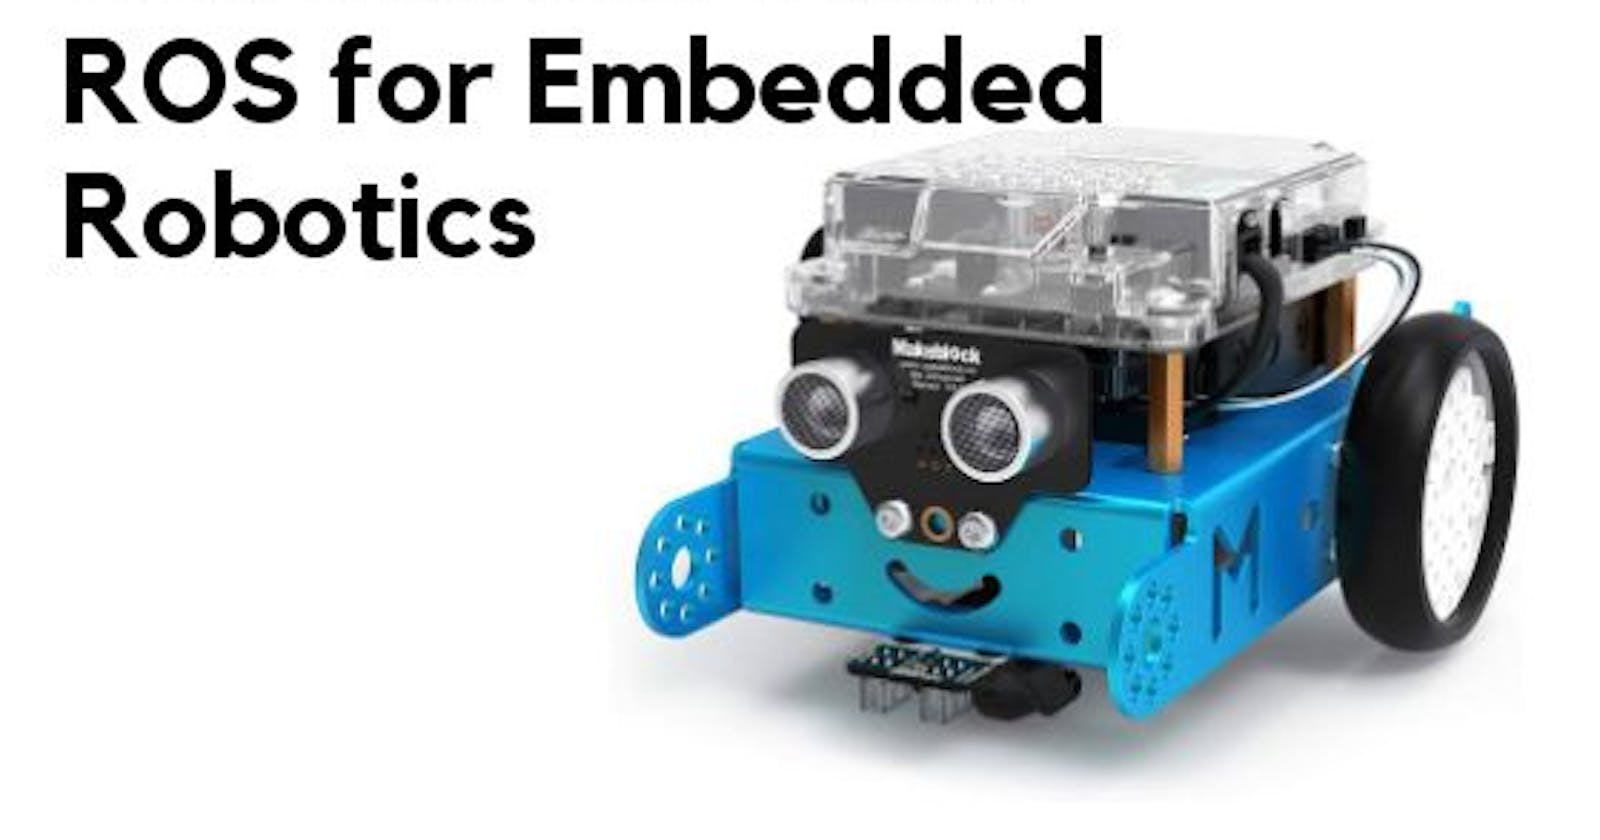 Get Started with ROS for Embedded Robotics